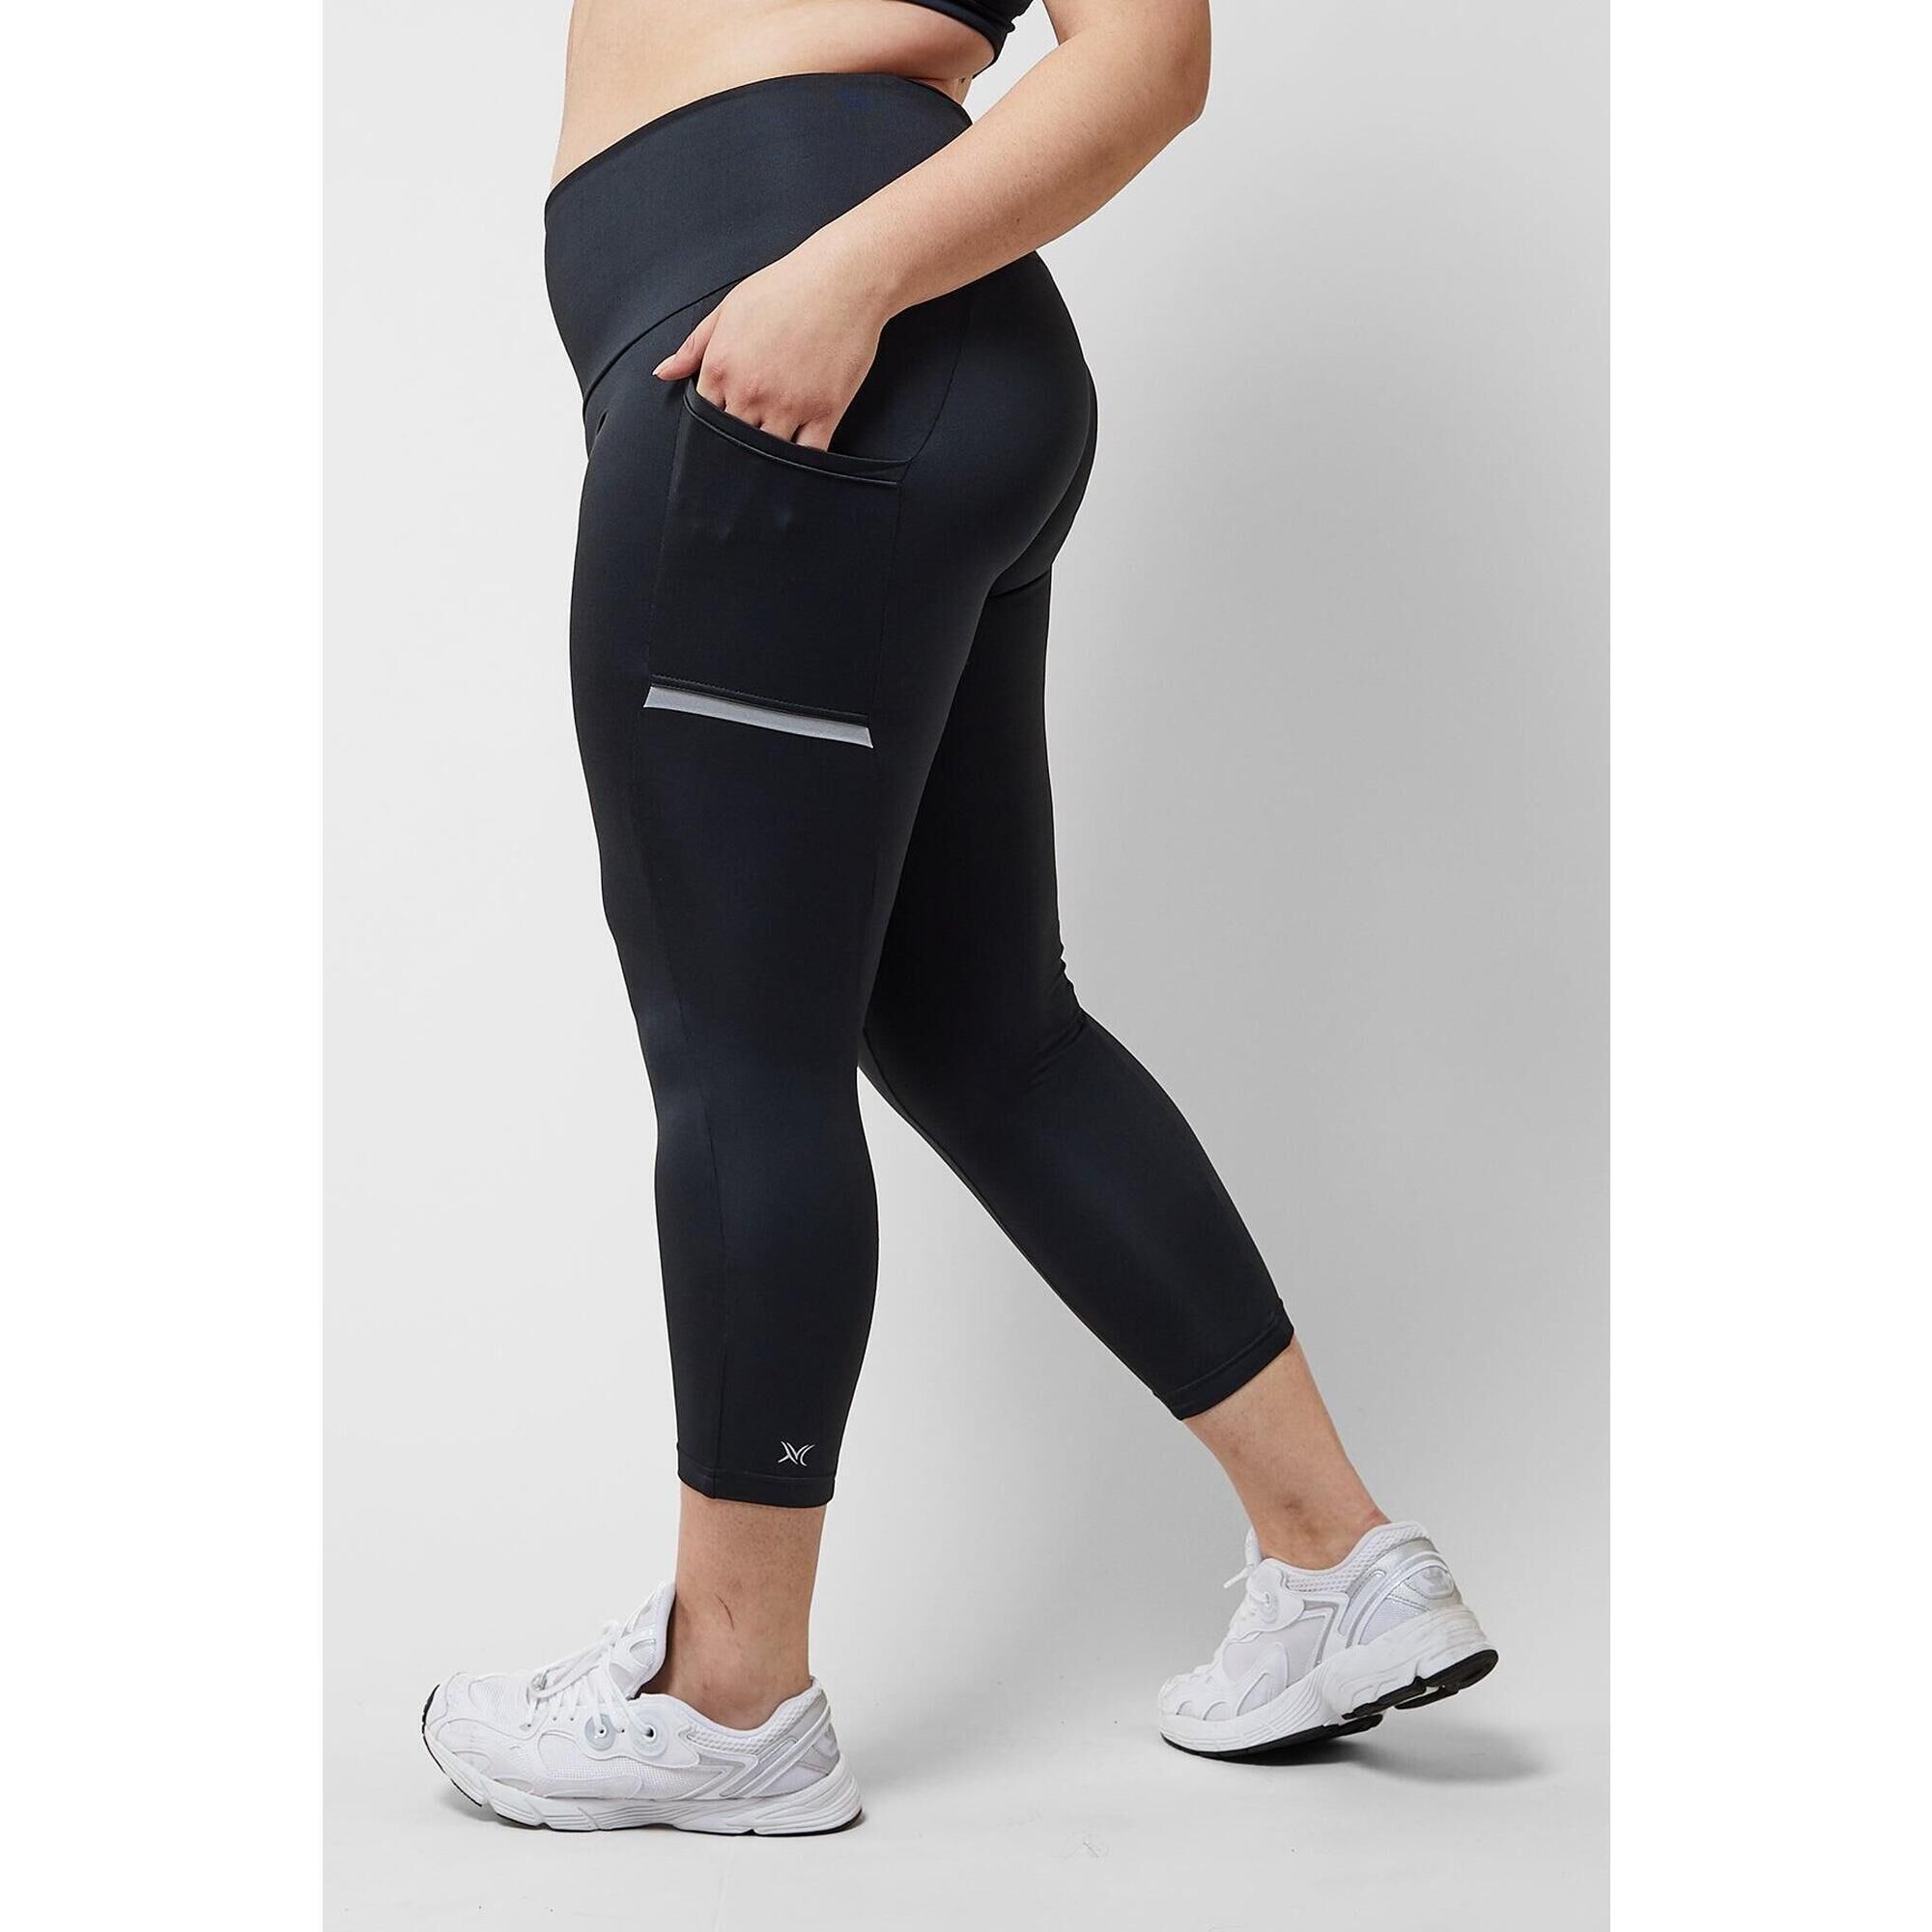 Extra Strong Compression Tummy Control High Waist Sport Leggings